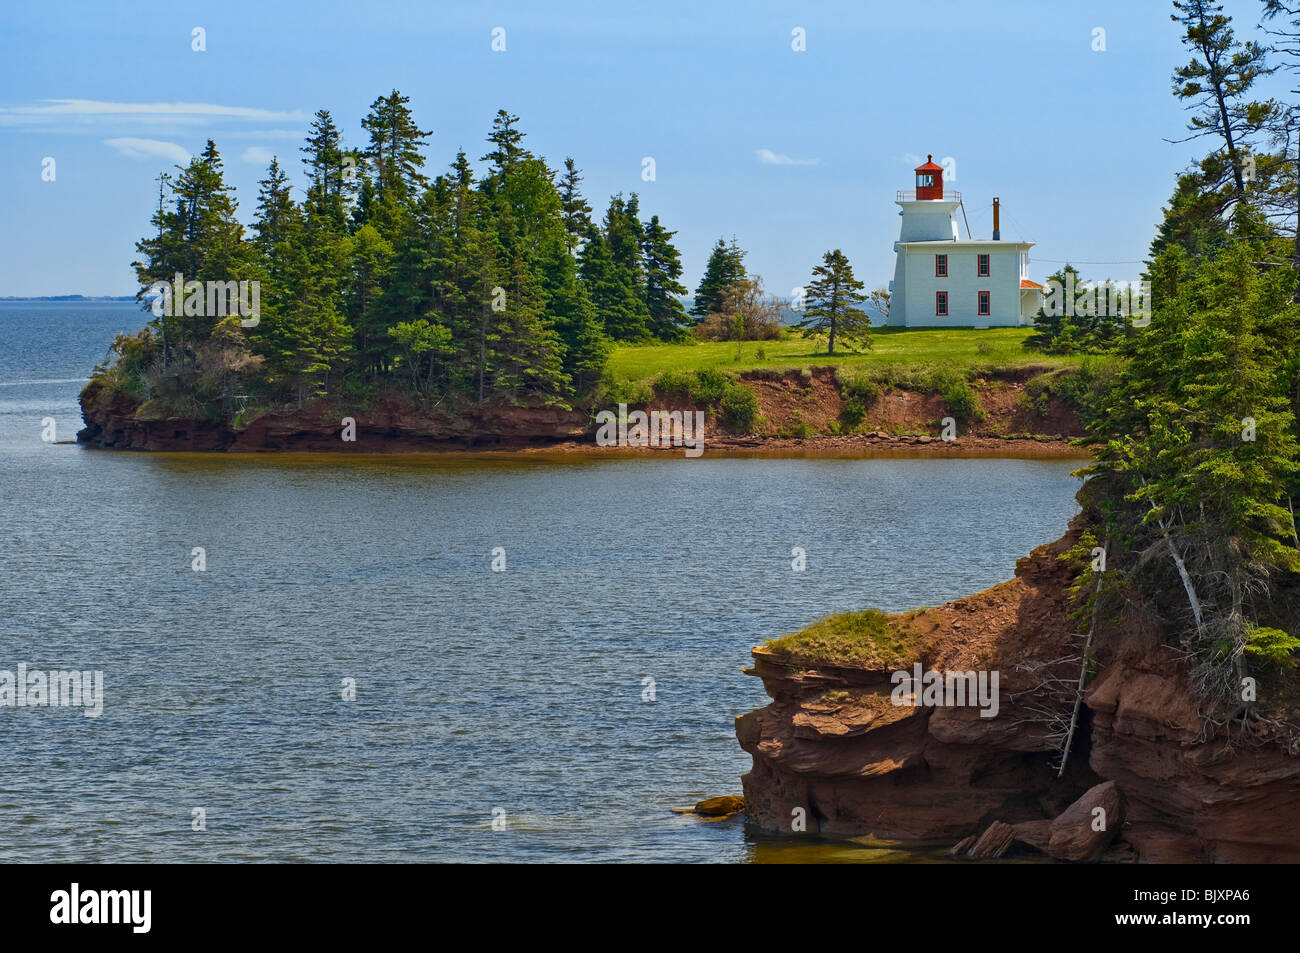 Phare de Fort Amherst National Historic Site, Prince Edward Island, Canada. Banque D'Images